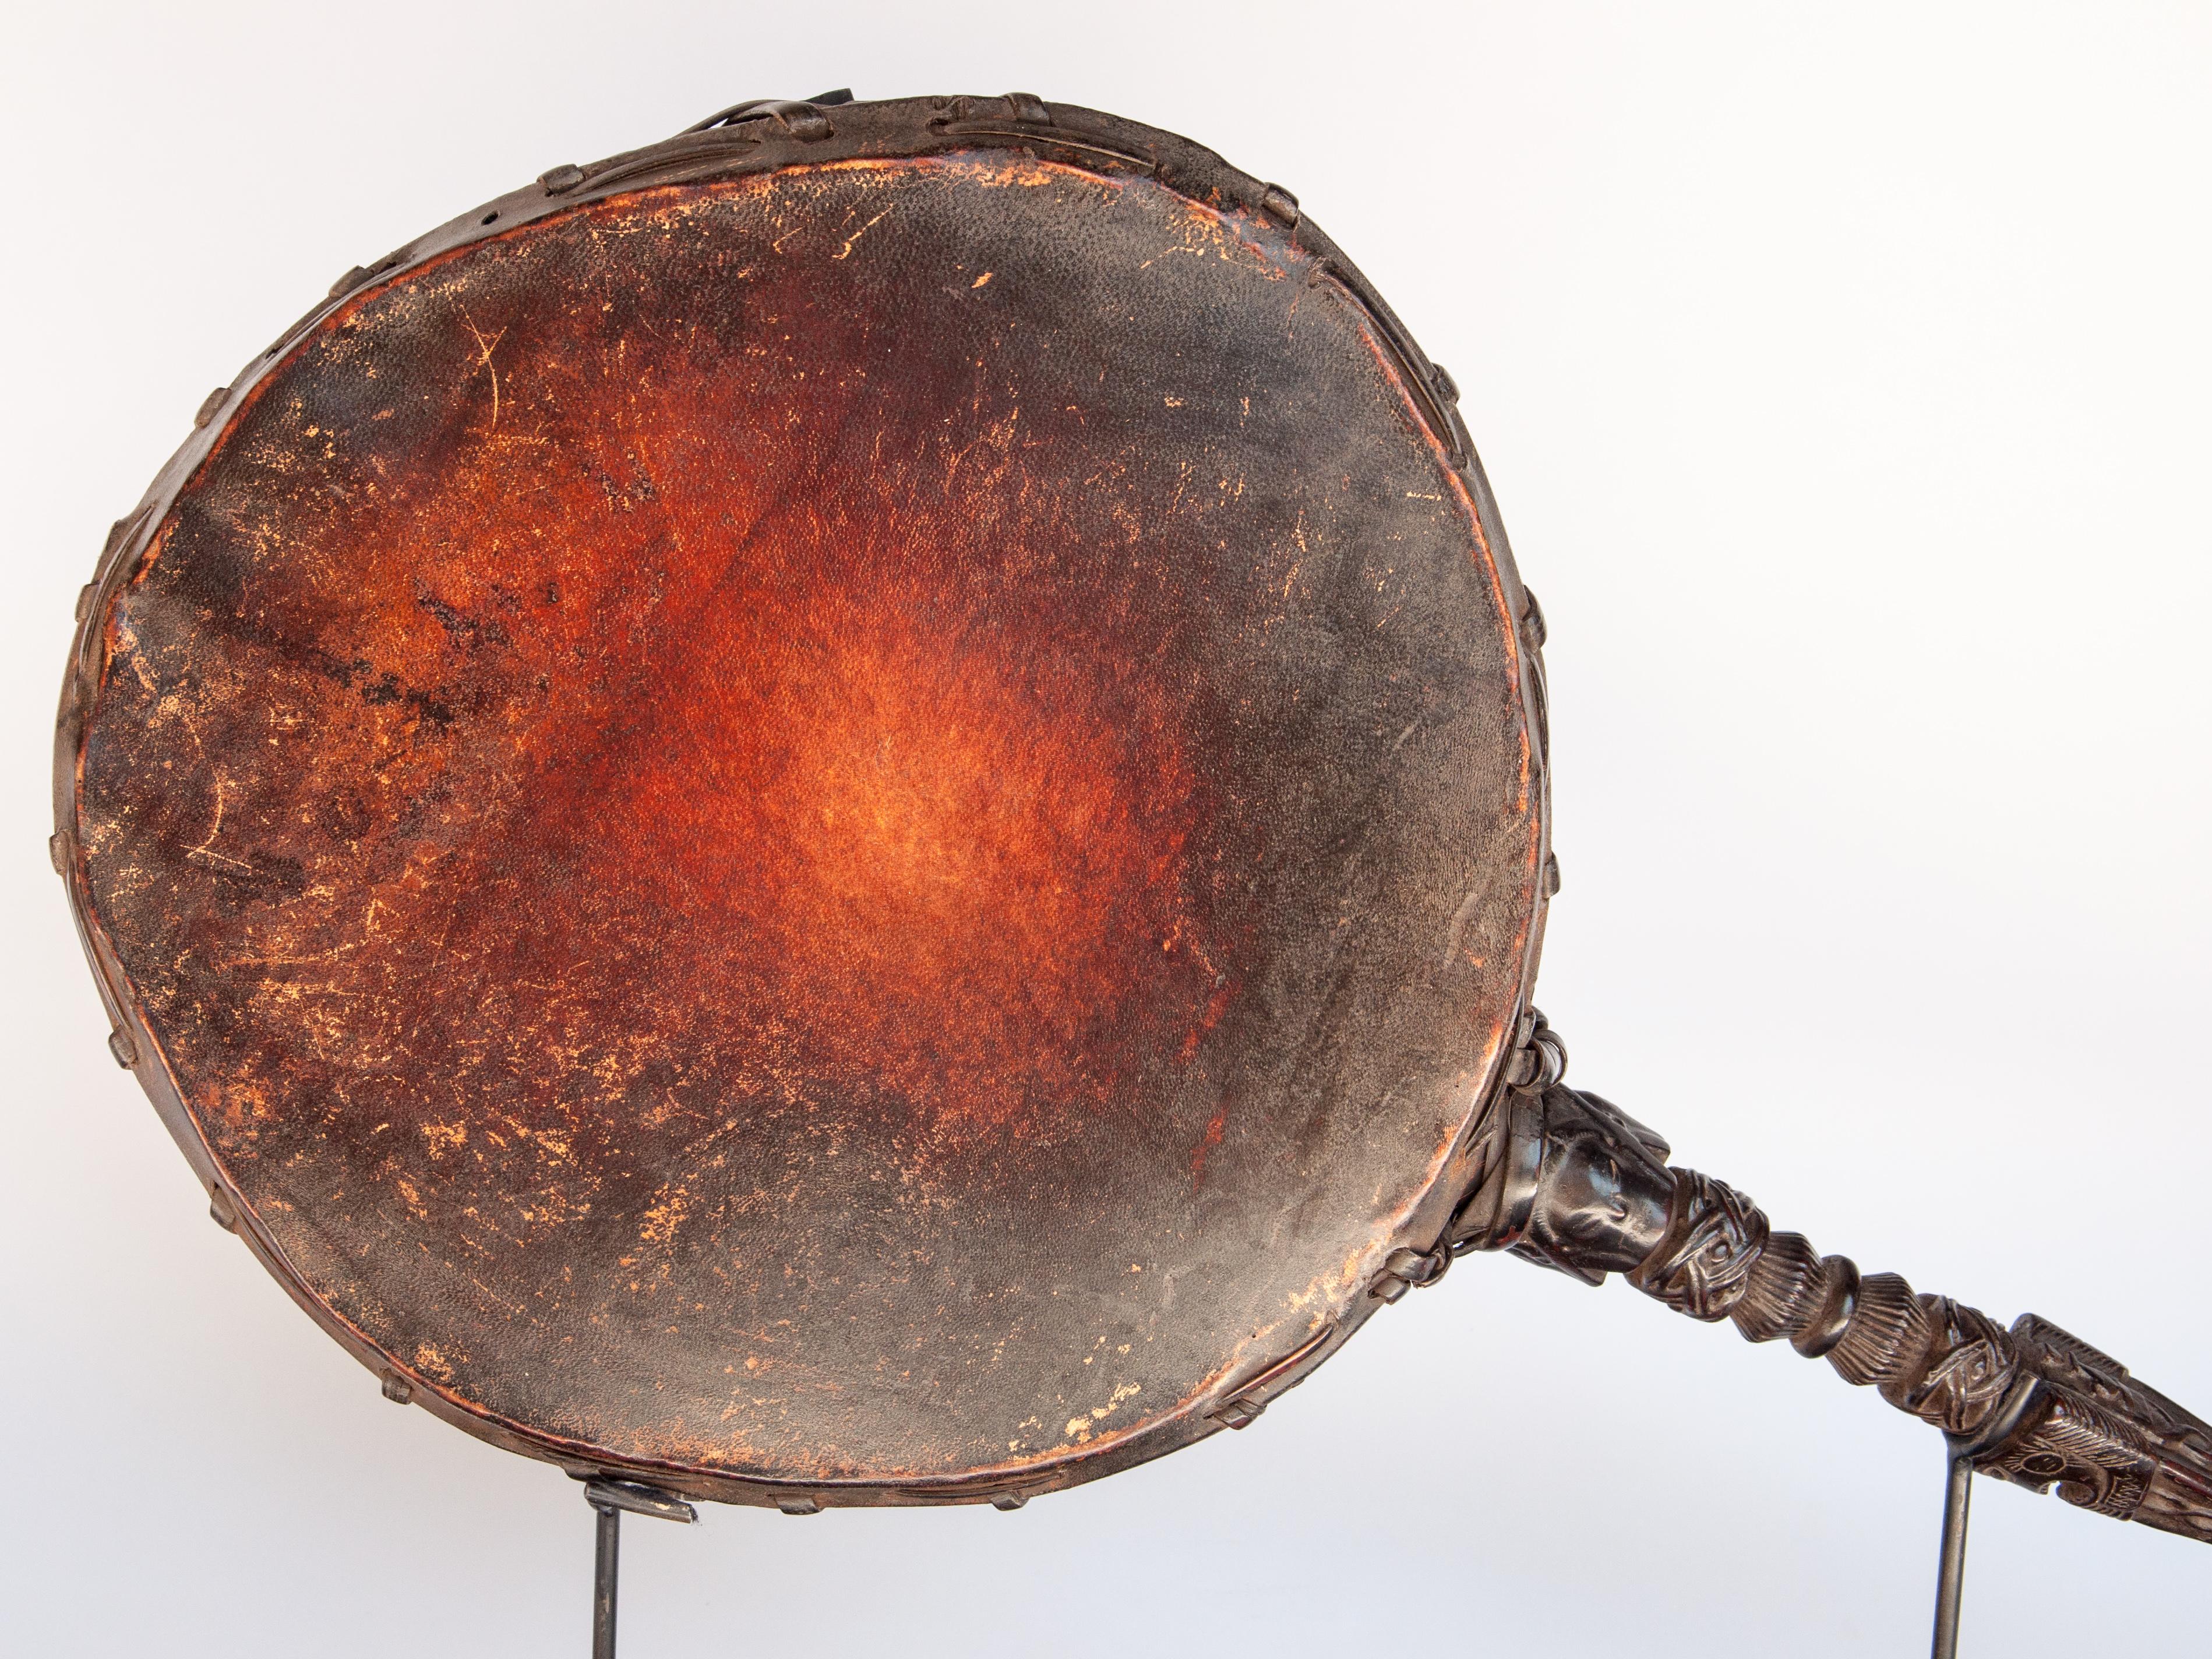 Vintage Shaman drum with carved wooden handle. Nepal Himalaya, mid-20th century. Mounted on a metal base.
Typical of the drums used by shamans in the Himalayan regions of central and east Nepal, this two sided drum has an extended handle akin to